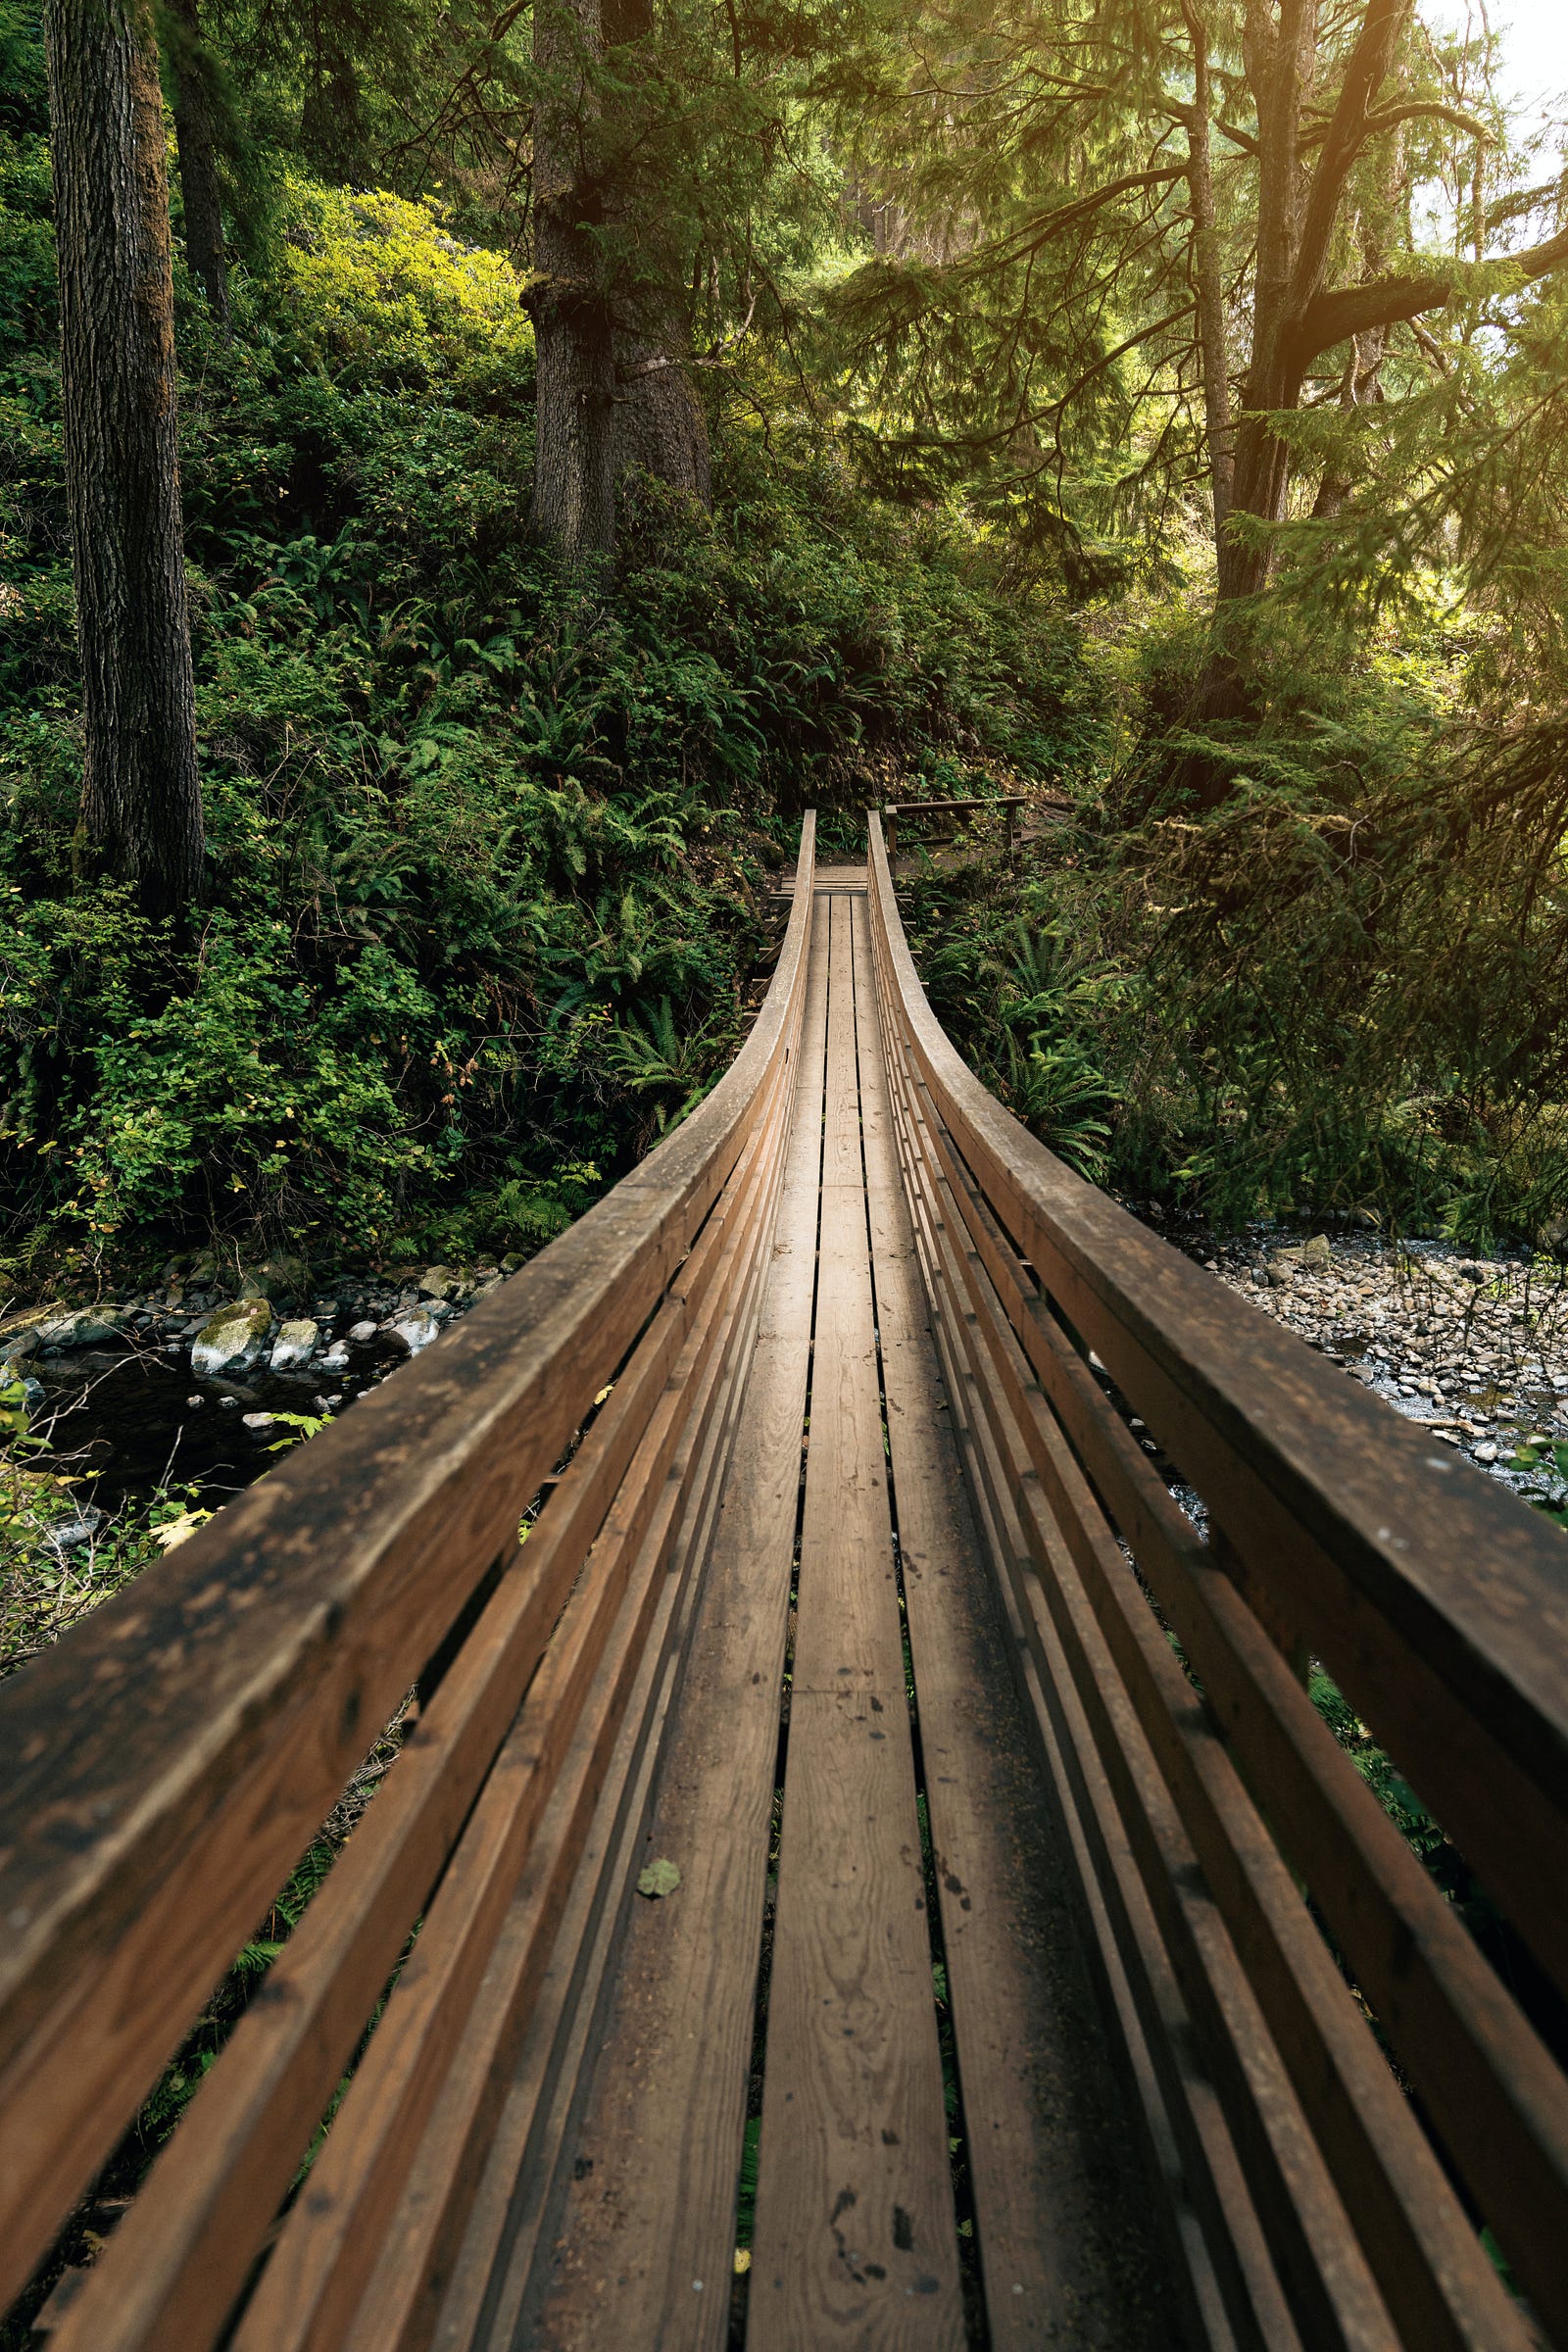 A wooden bridge in a Northwest USA forest. We see the bridge along its long axis. We nature enthusiasts can combine cardio with the great outdoors through hiking. The uneven terrain and elevation changes provide an excellent workout for our hearts and legs.